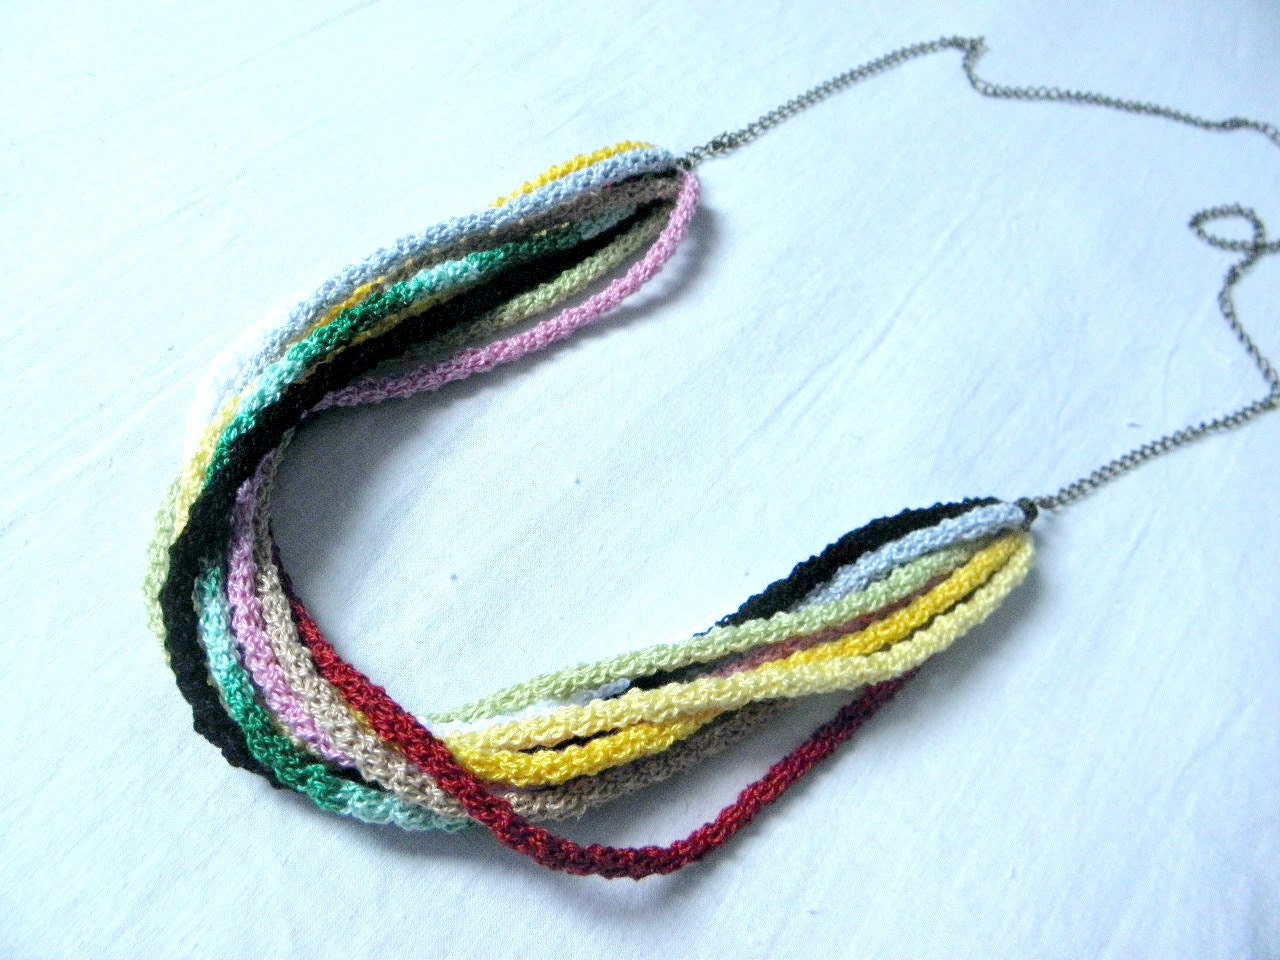 Crocheted necklace cords